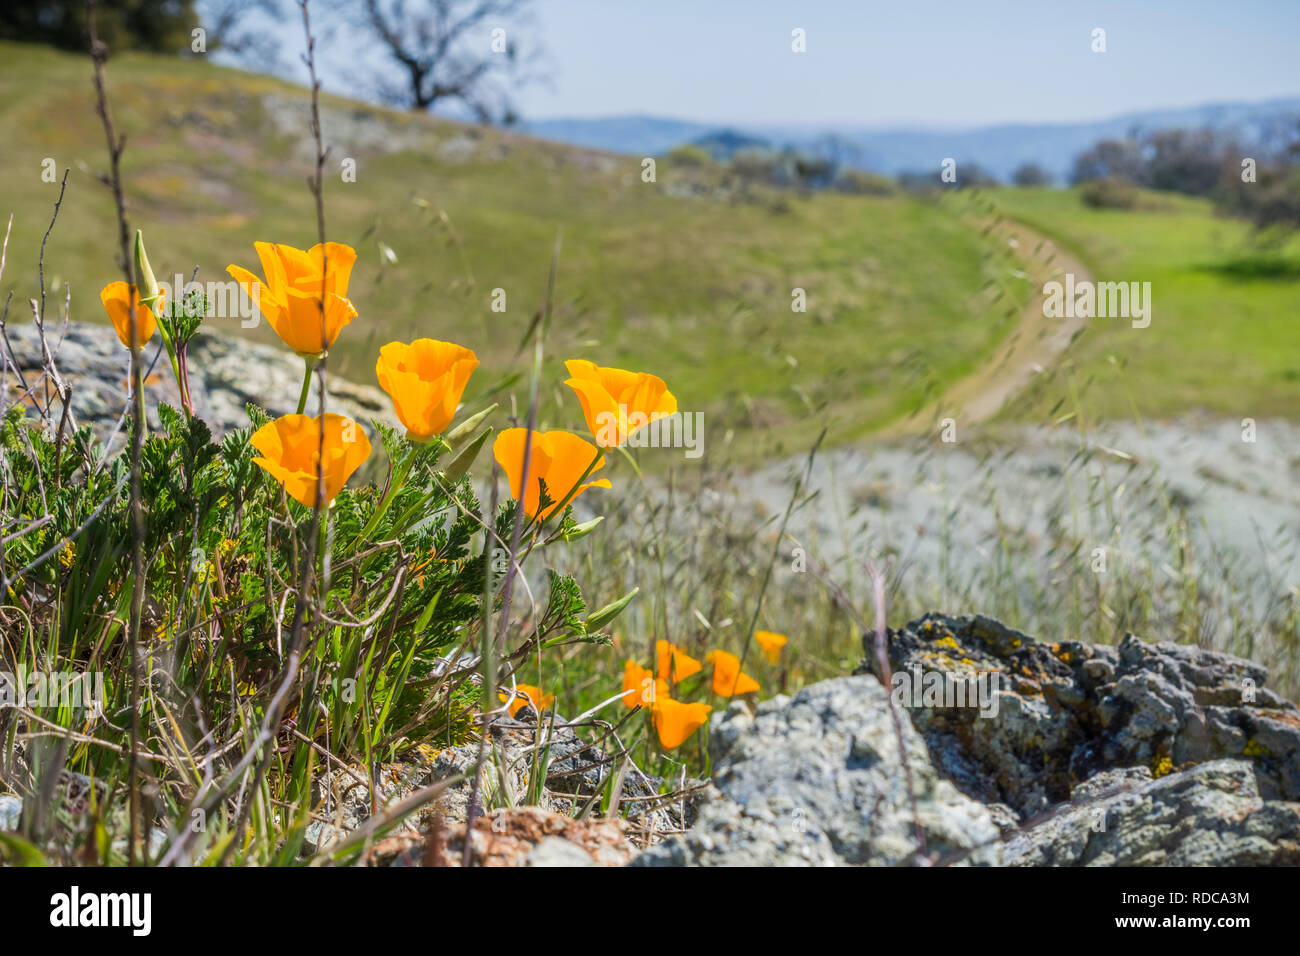 California Poppies (Eschscholzia californica) growing among rocks, blurred trail going uphill in the background, California; selective focus Stock Photo